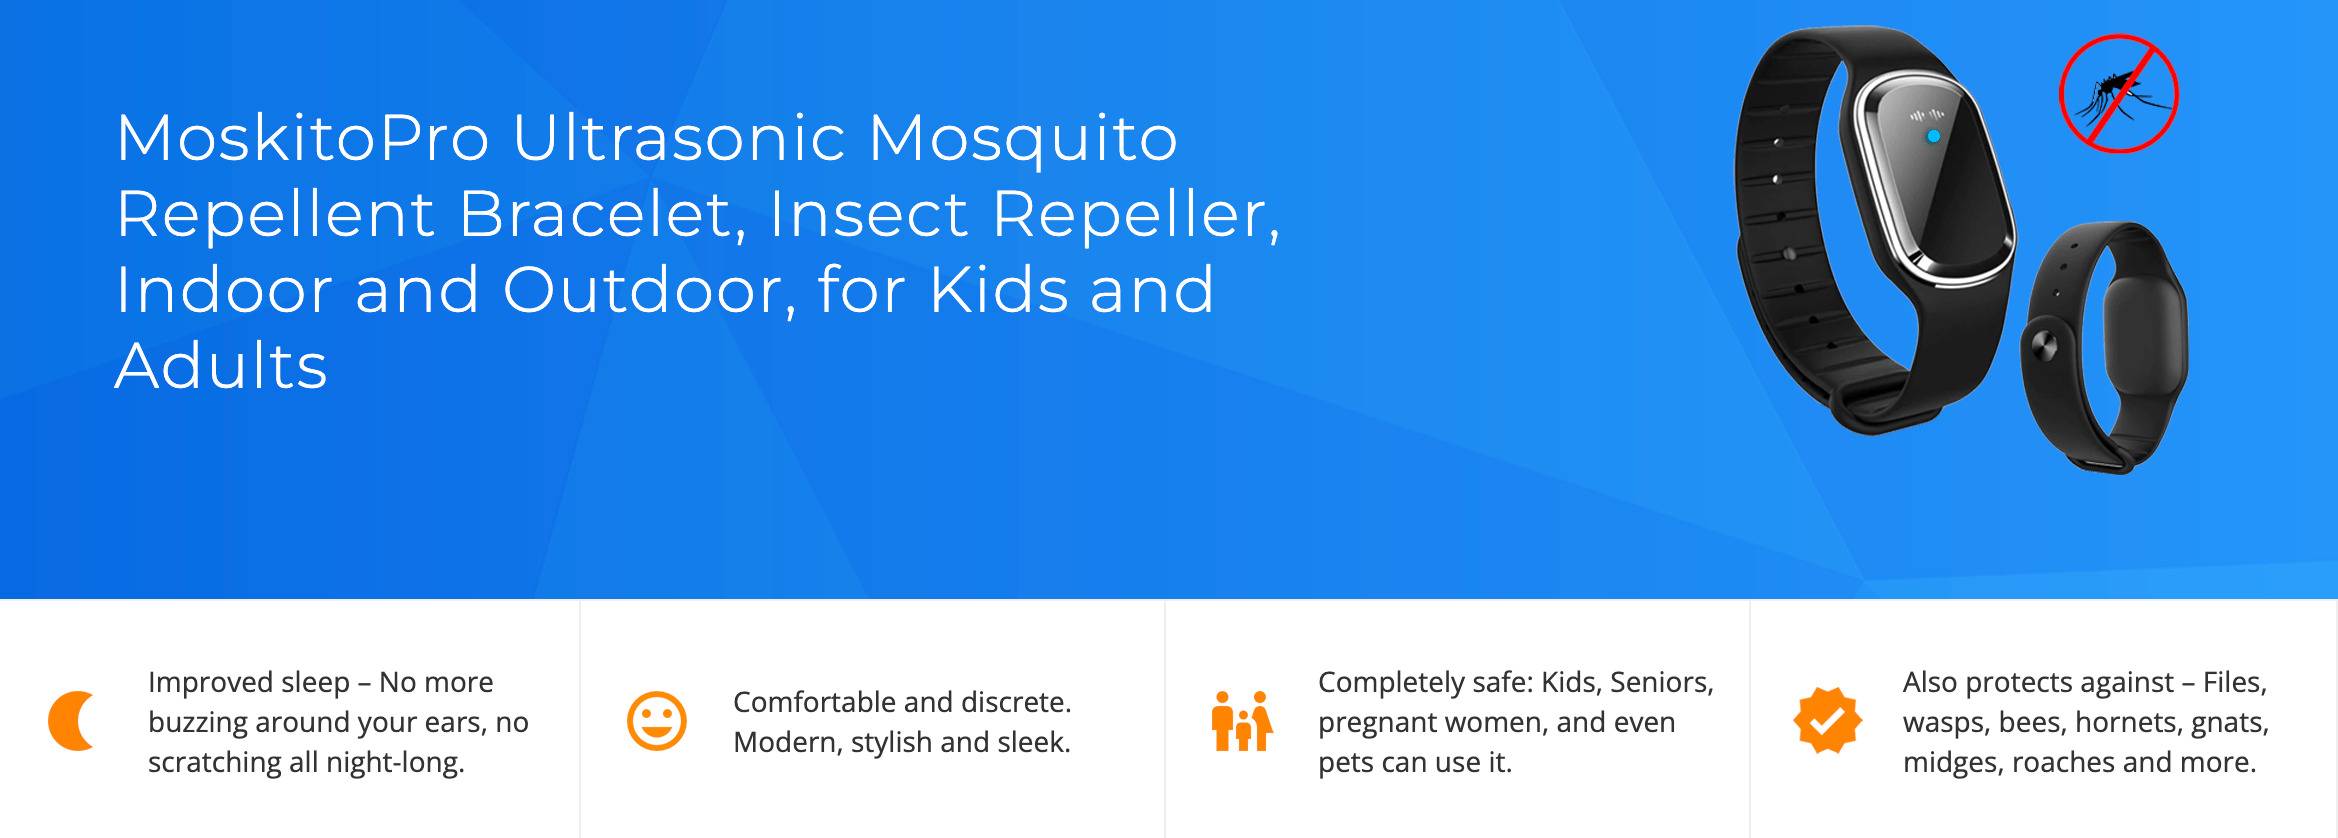 Our flagship product: MoskitoPro Mosquito Repellent